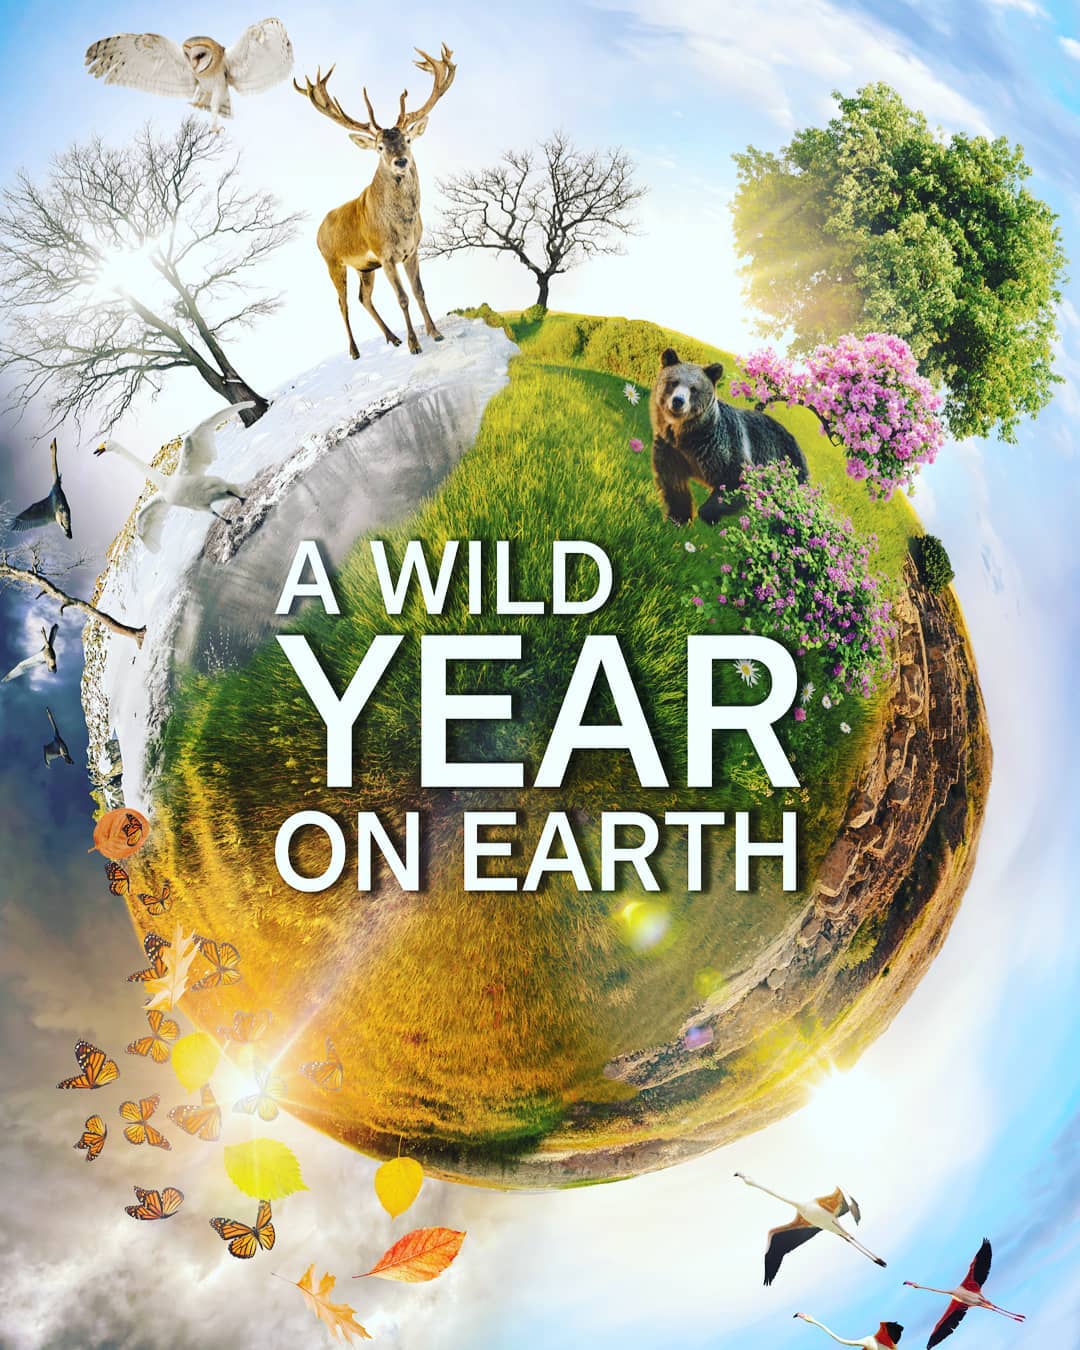 A Wild Year On Earth - S01E01 - NL Subs - The Year Begins